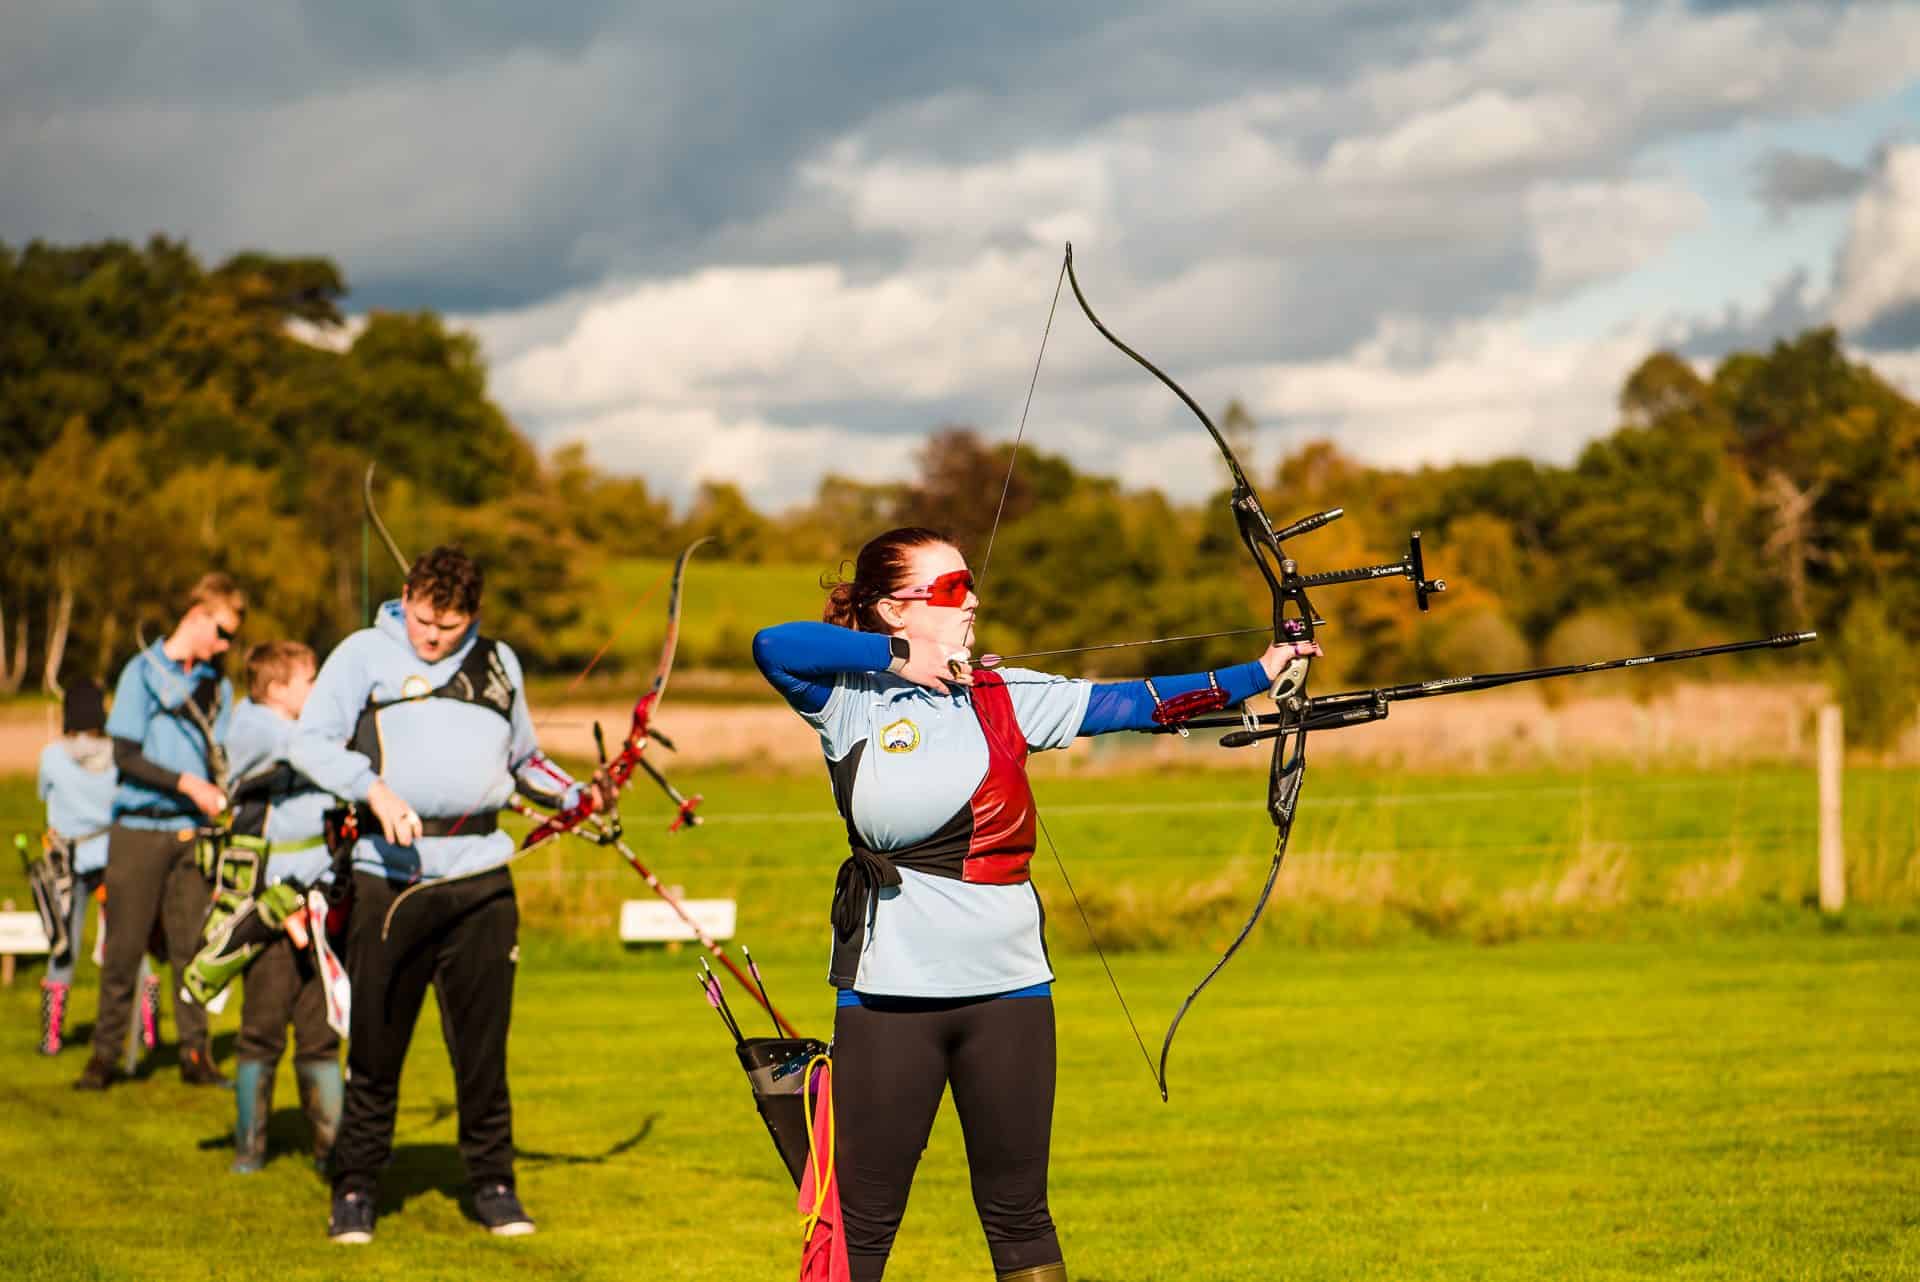 Covid-19 archery restrictions updated across the UK